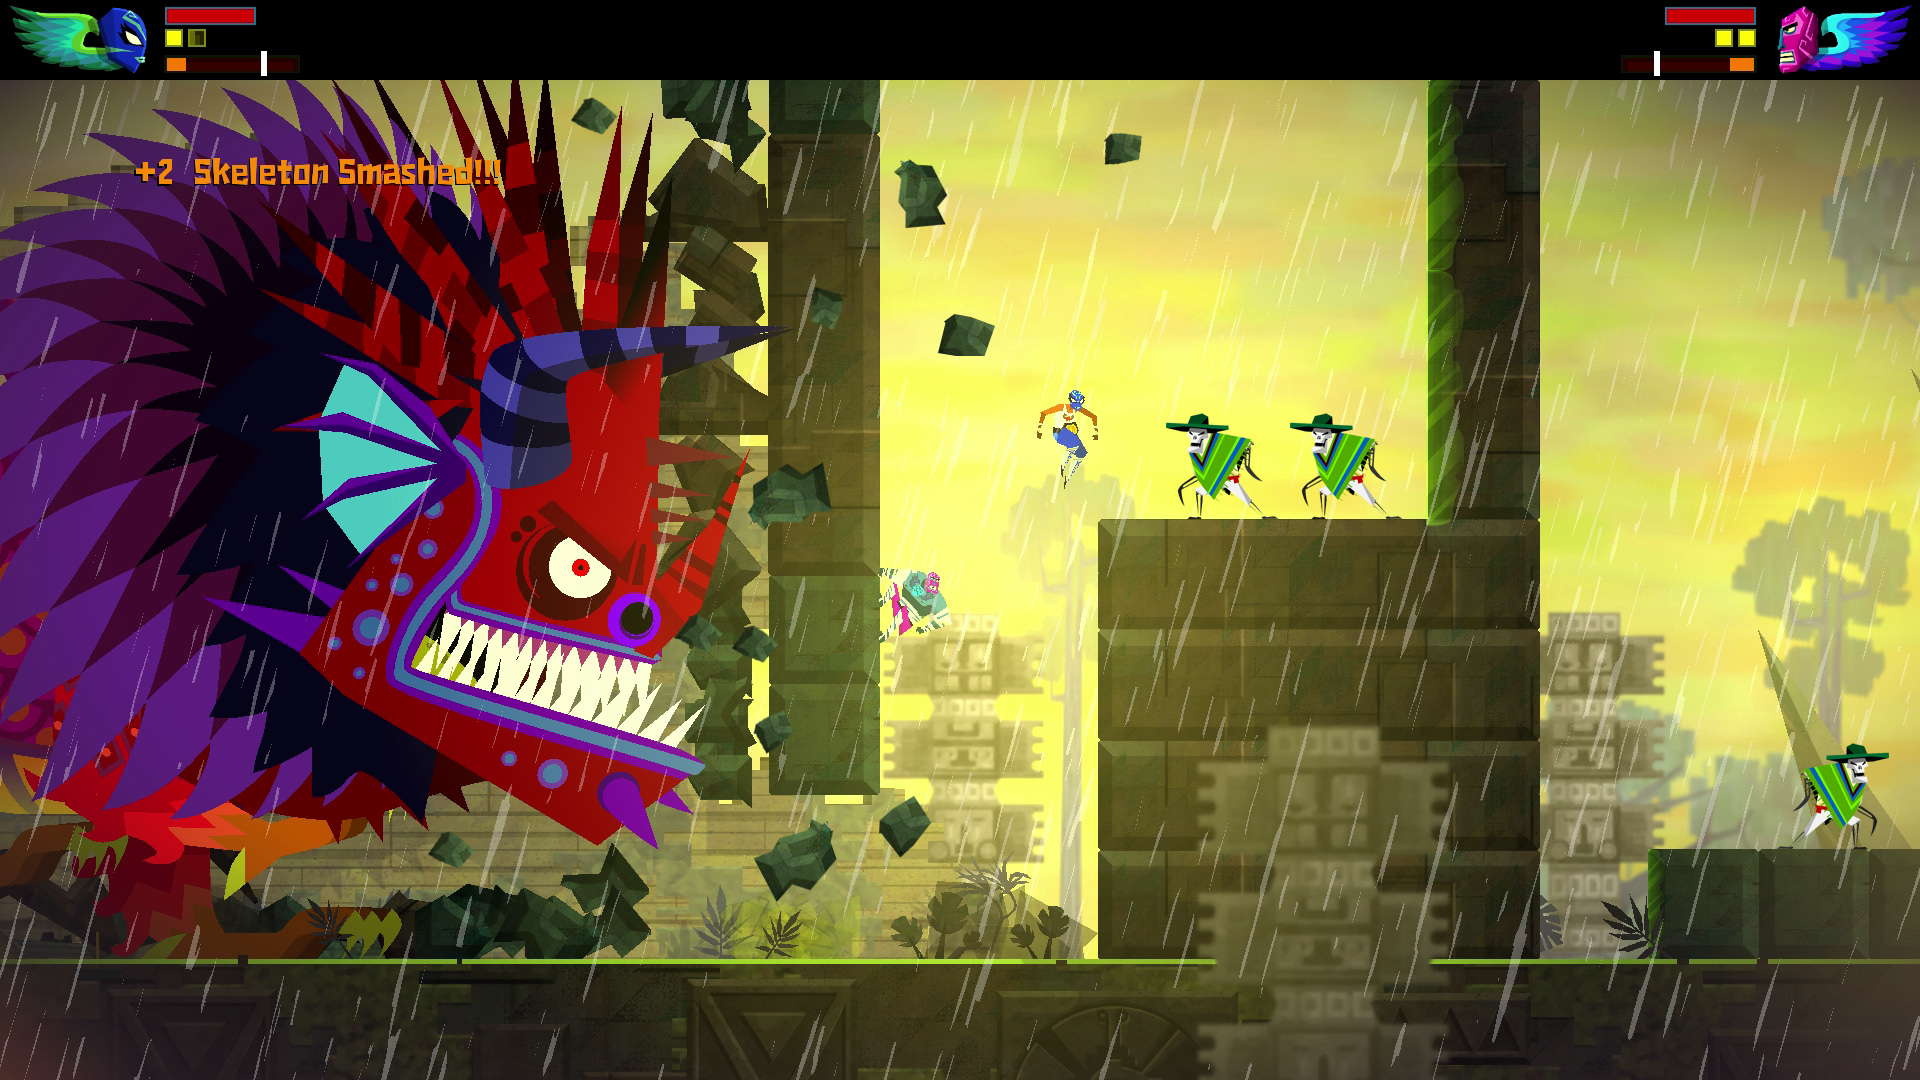 Screenshot of a console game with a large, scary game boss